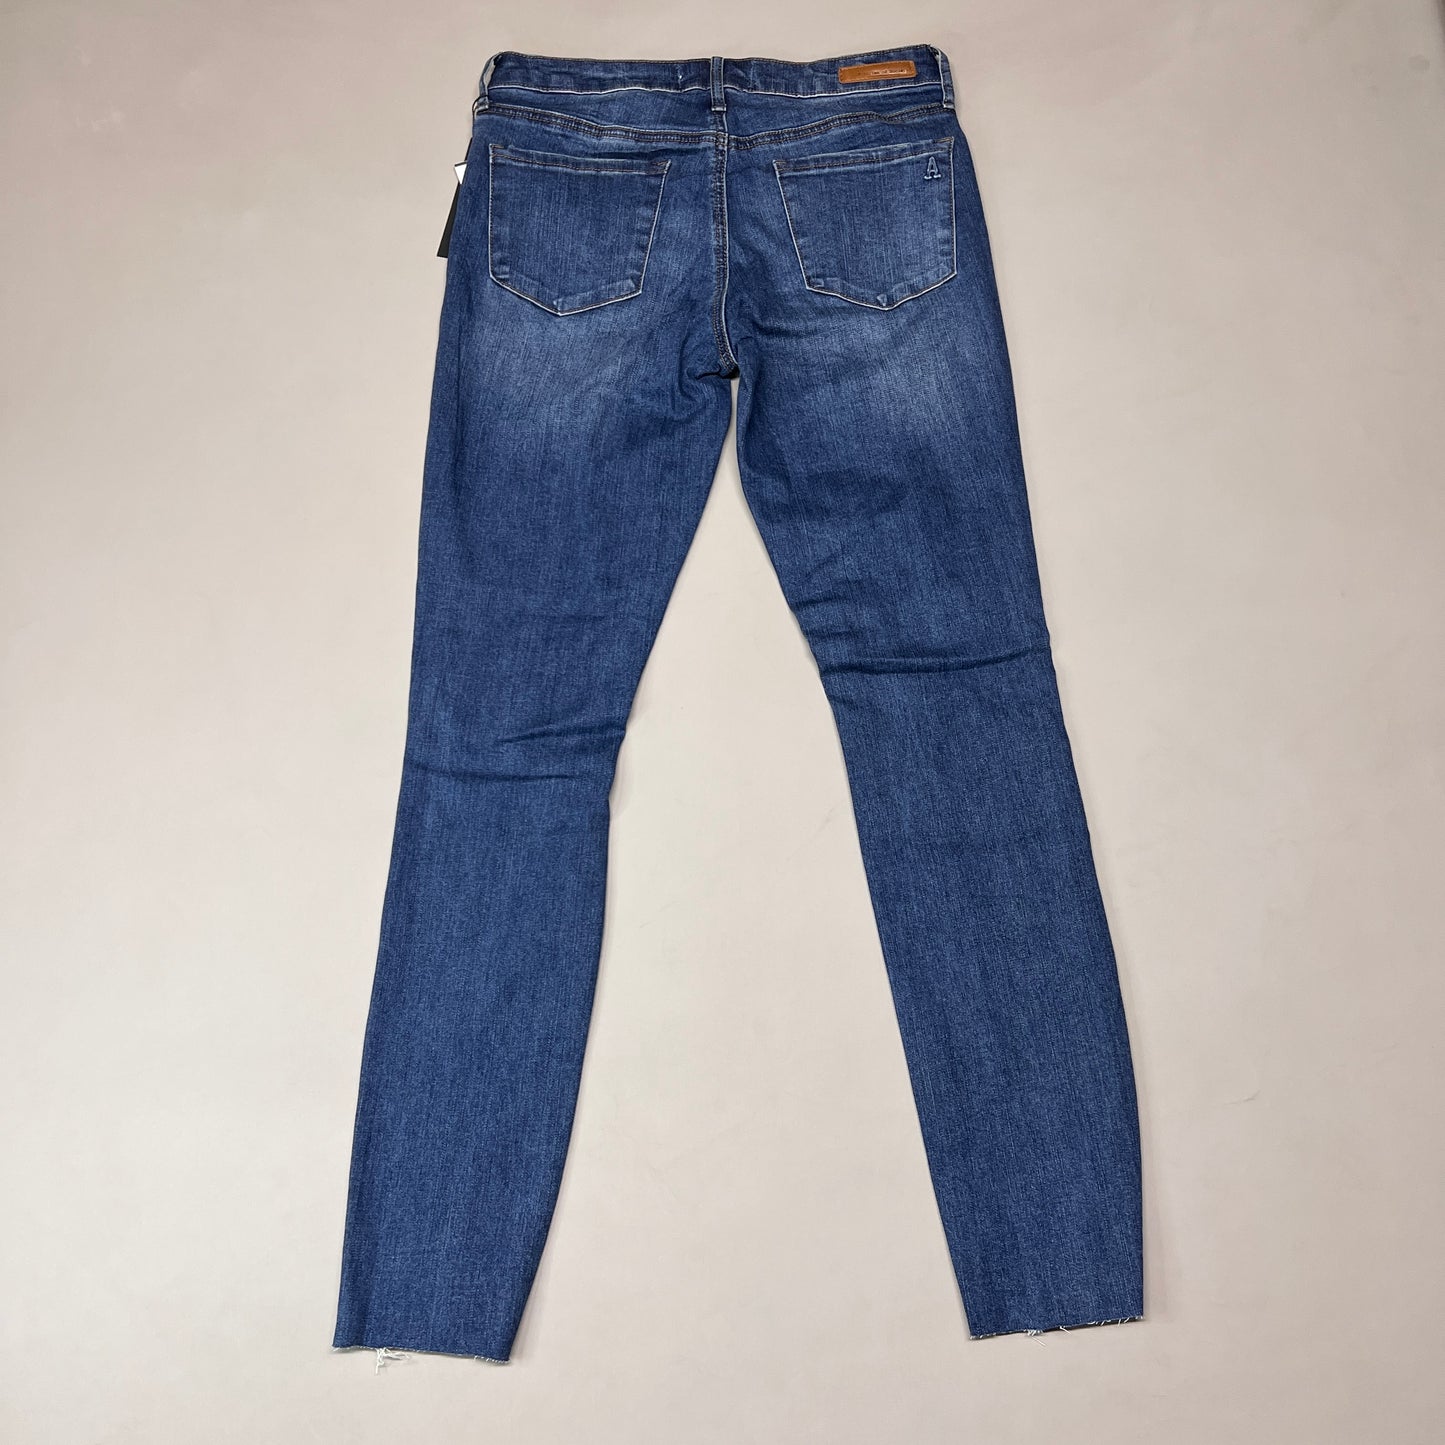 ARTICLES OF SOCIETY Hilo Ripped Denim Jeans Women's Sz 26 Blue 5350PLV-706 (New)